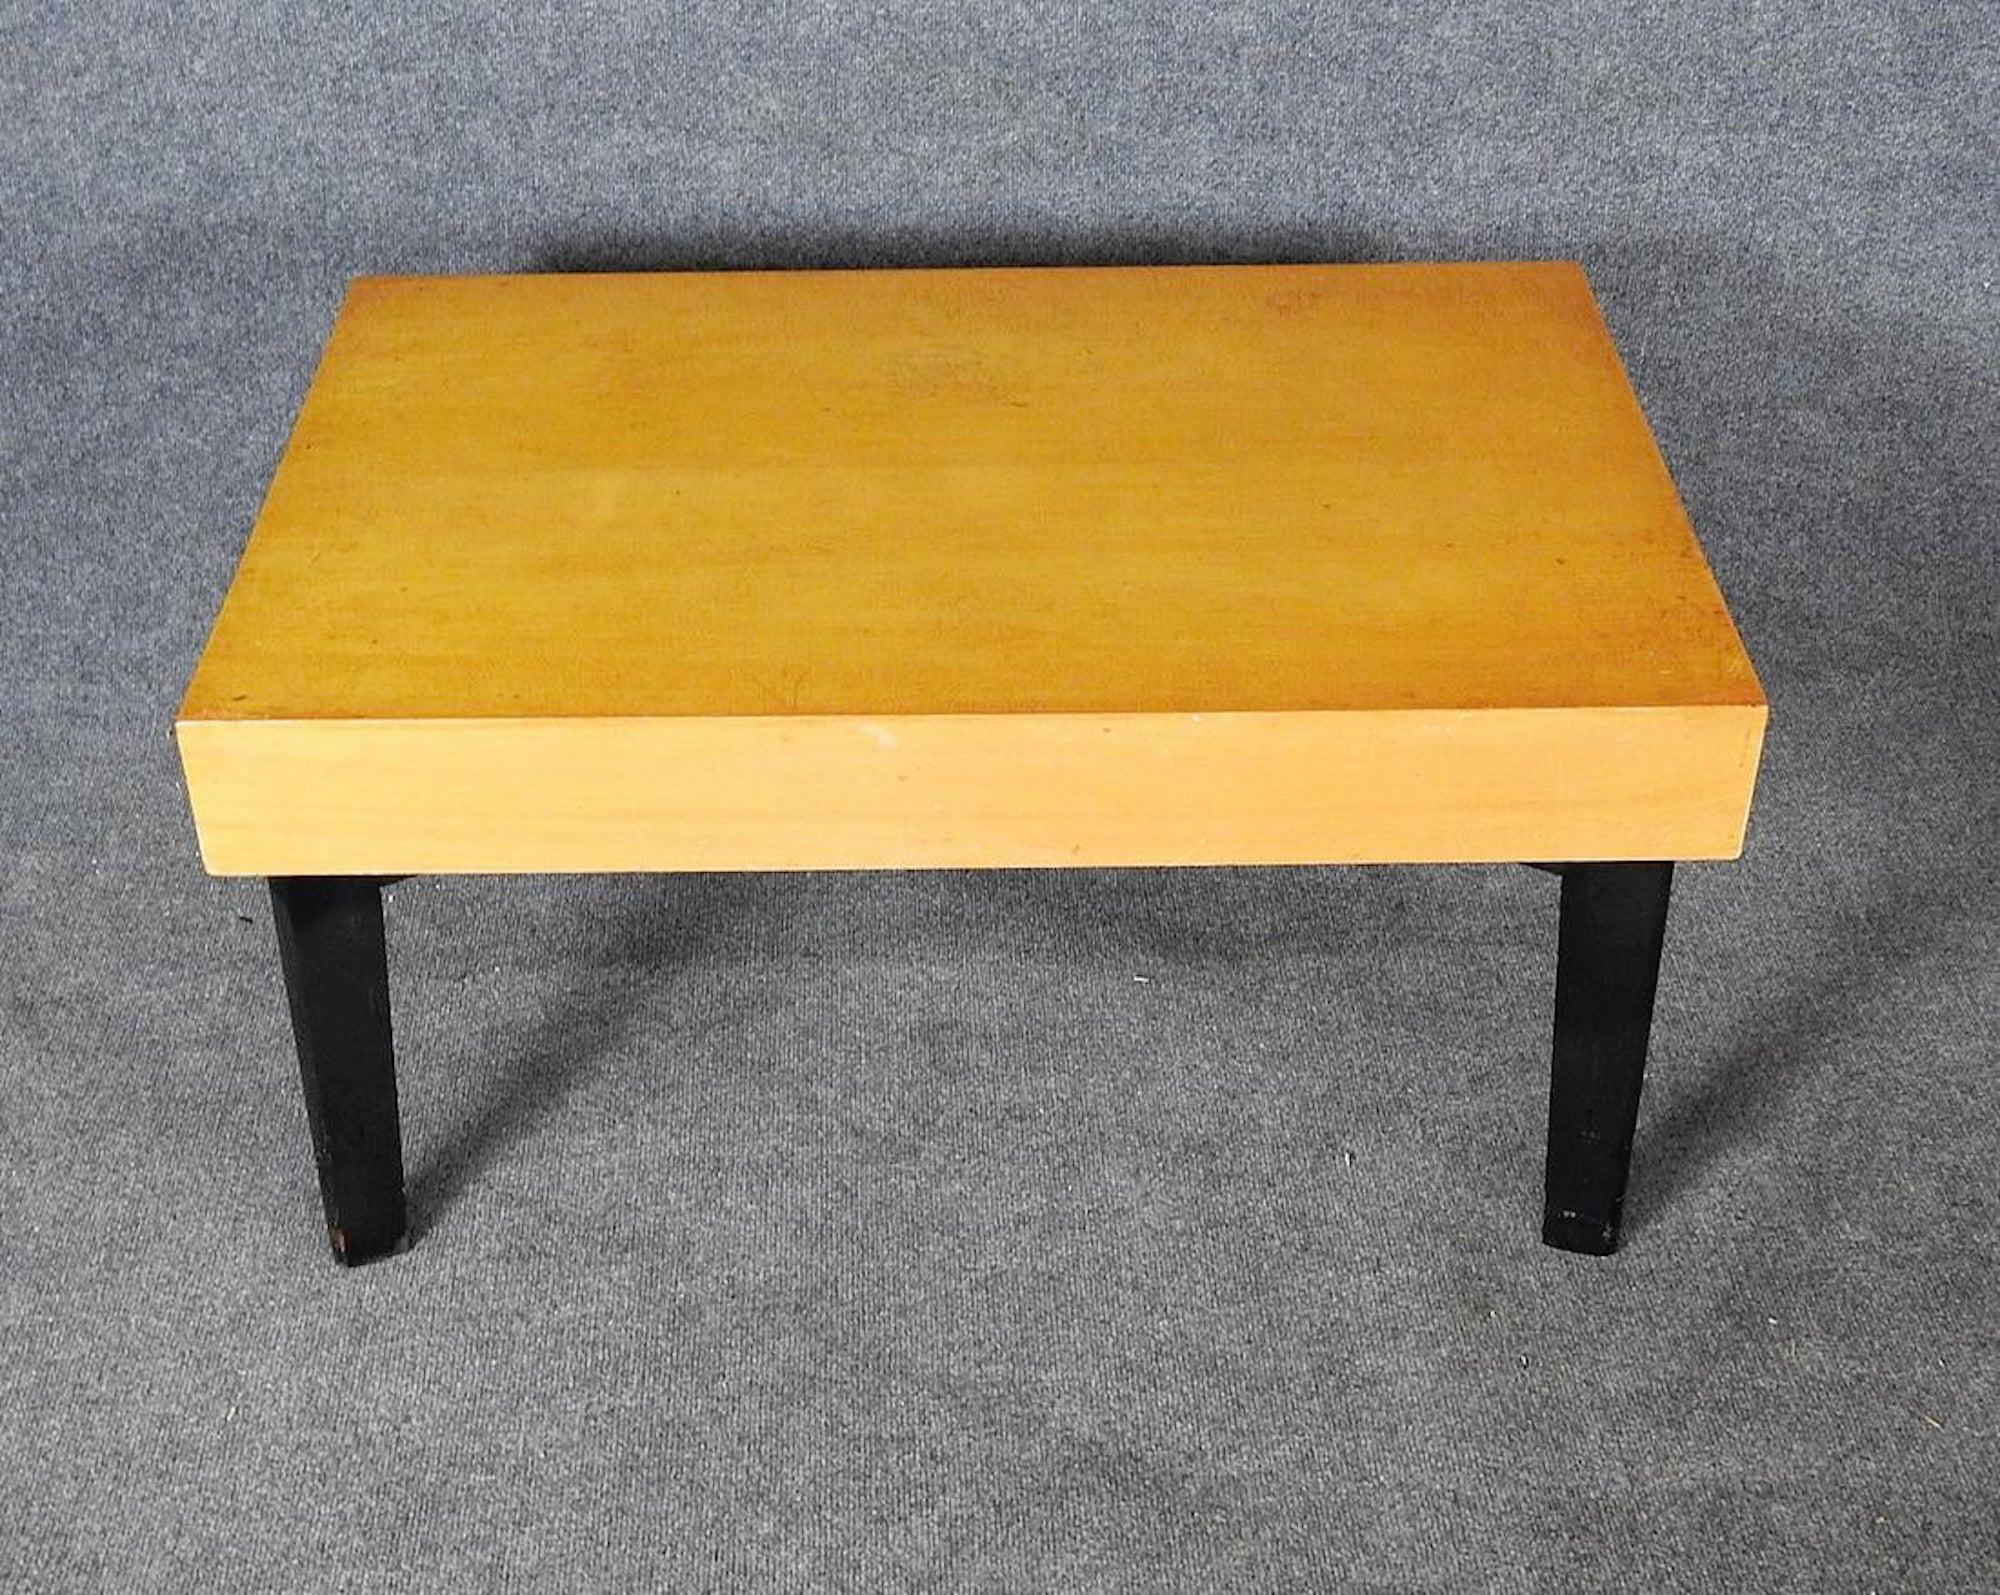 Robs John Gibbings table with extension storage. Blonde veneer with black legs.
Size: Each extension 17